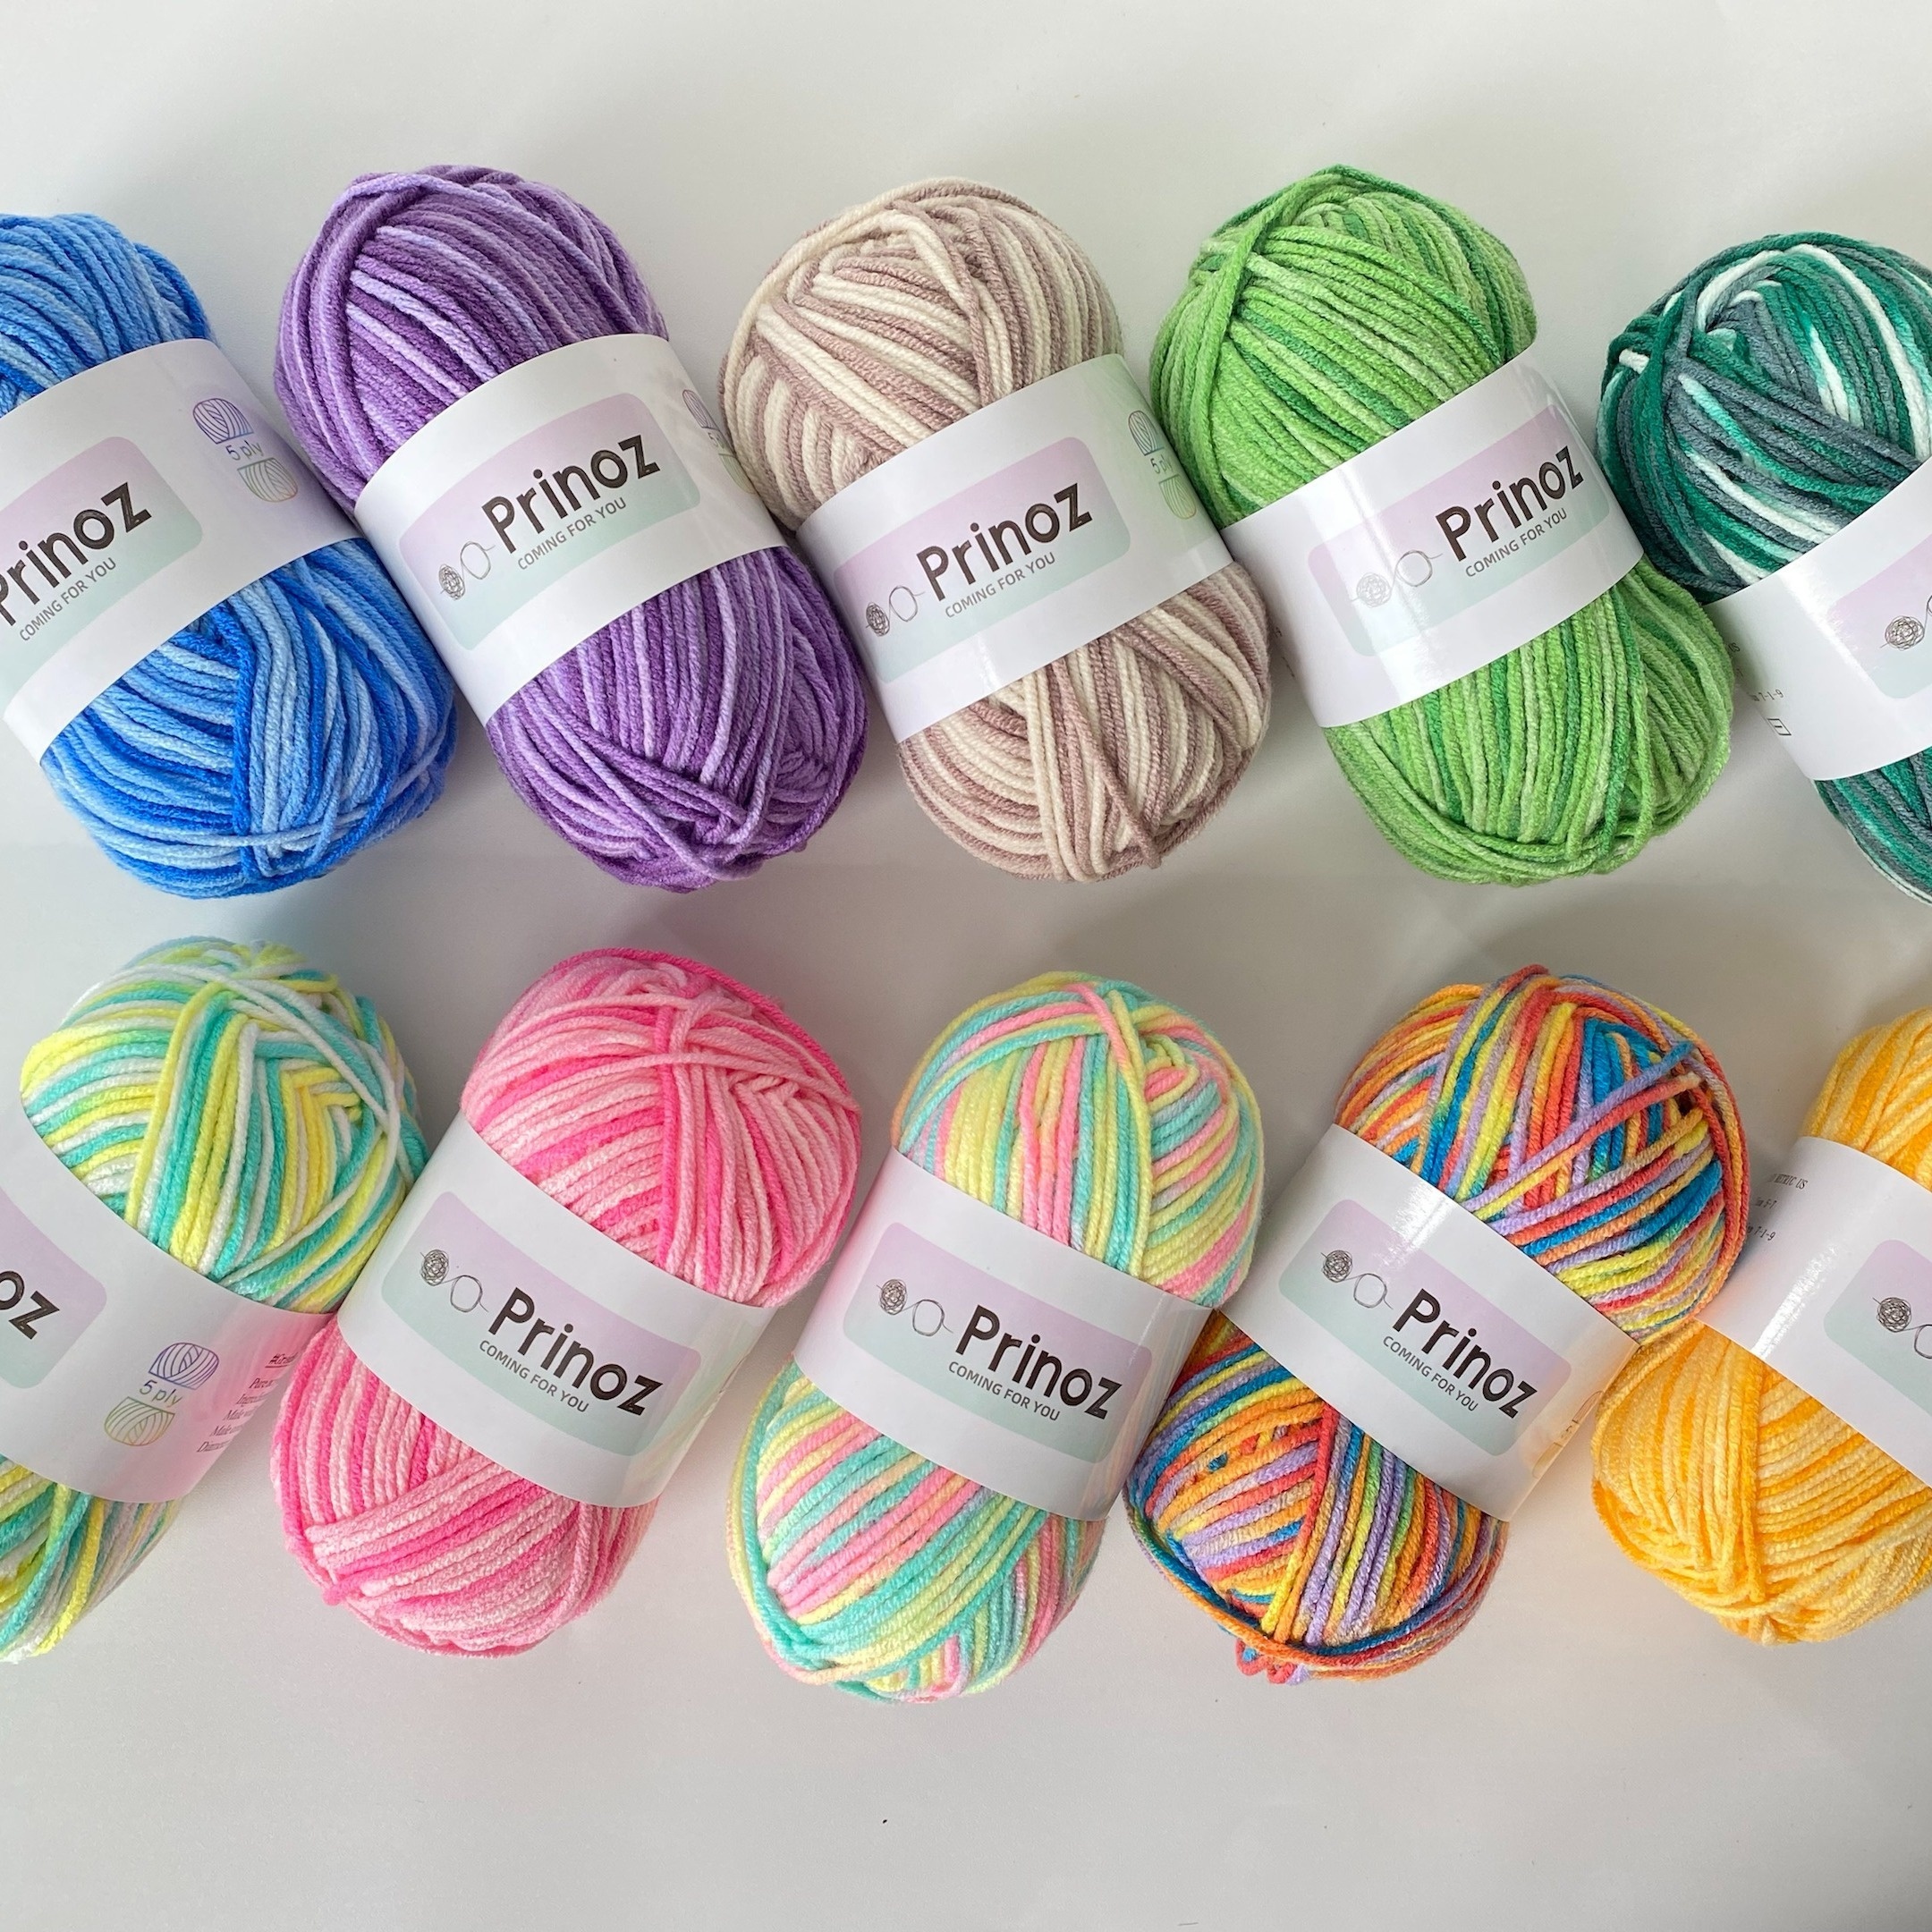 1 Skein 5-ply Rainbow Color Yarn For DIY Crocheting And Knitting Hat,  Scarf, Sweater And Crafts, 100g